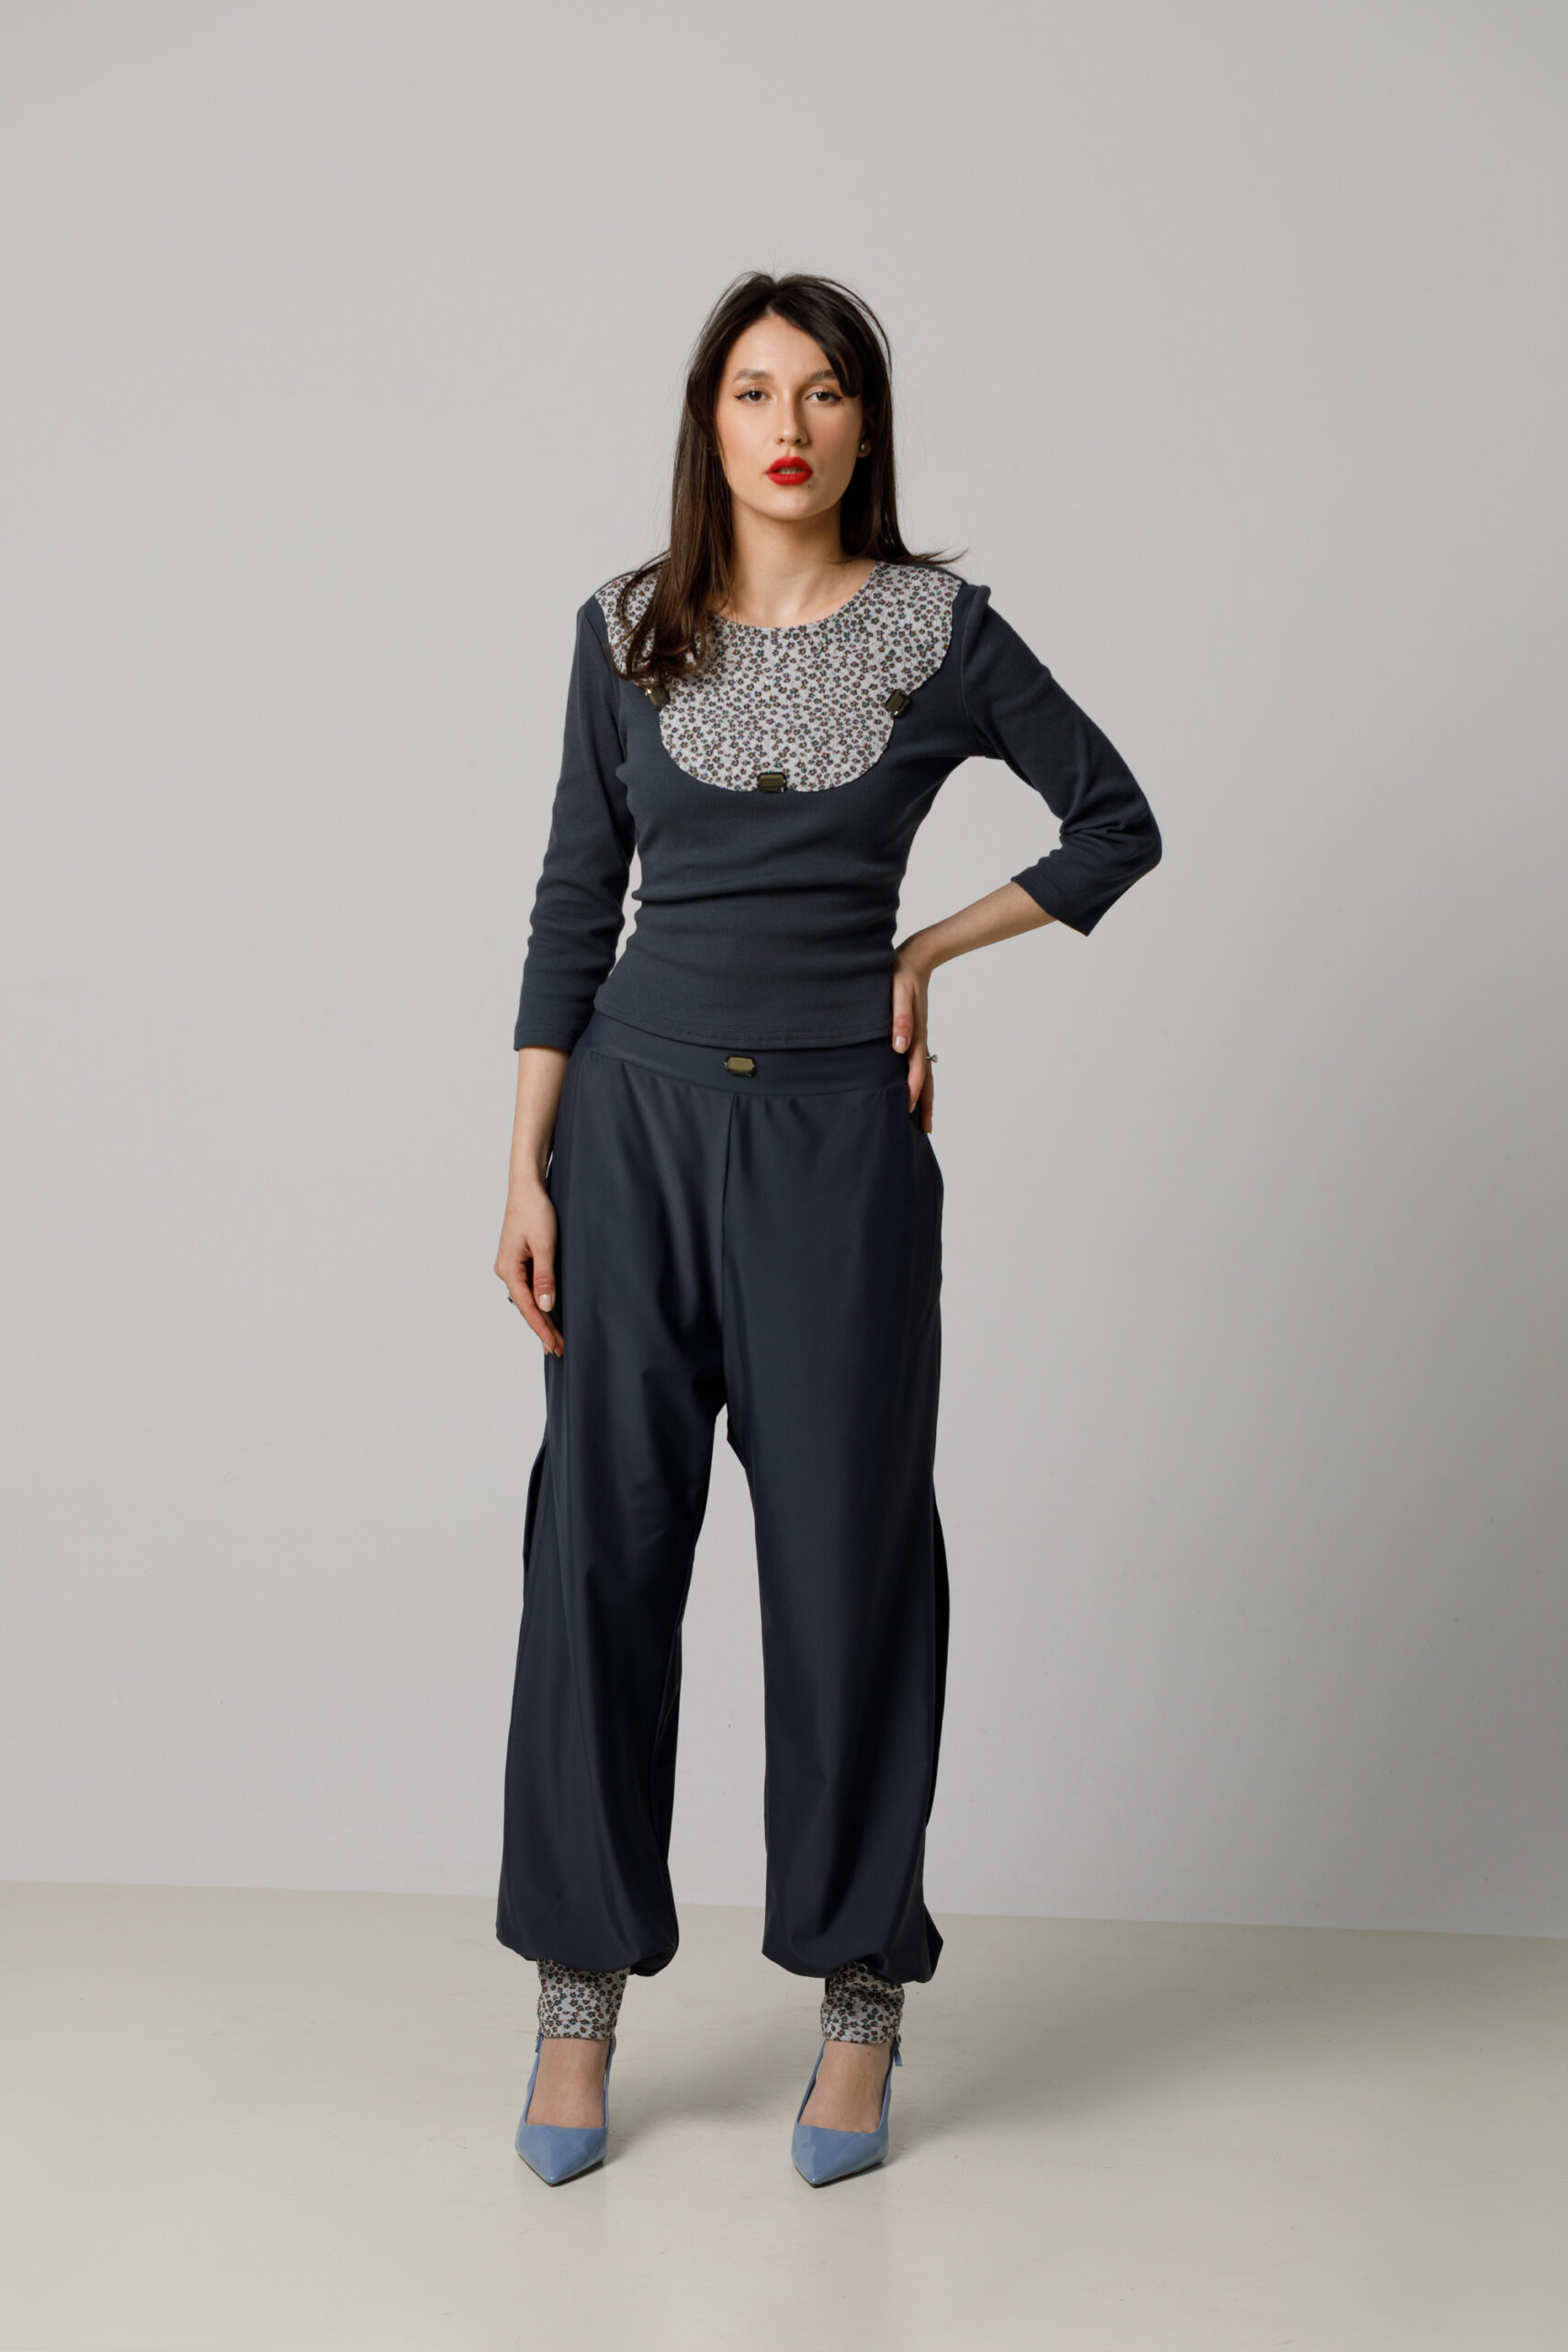 COCO GRAY CASUAL PANTS WITH FLORAL DETAIL. Natural fabrics, original design, handmade embroidery